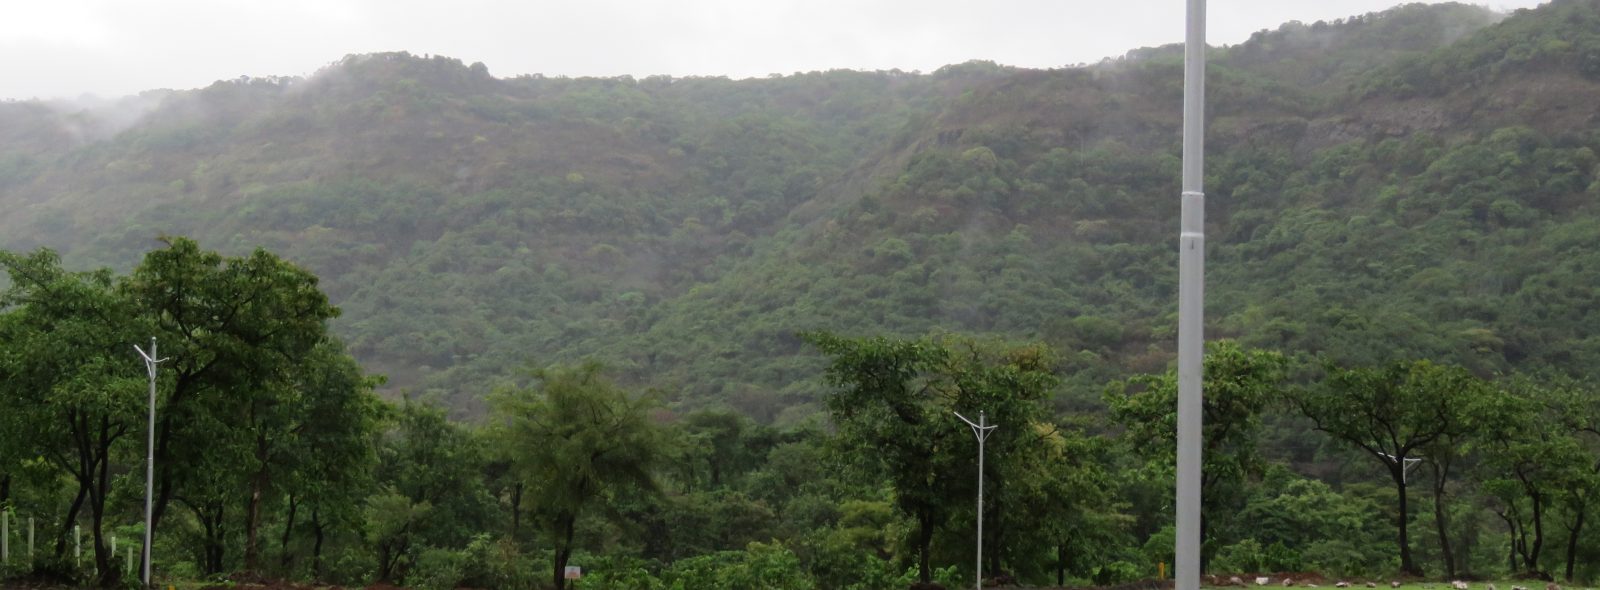 16 acre land for sale in Tamhini, Mulshi near Pune in Best PricePlots On